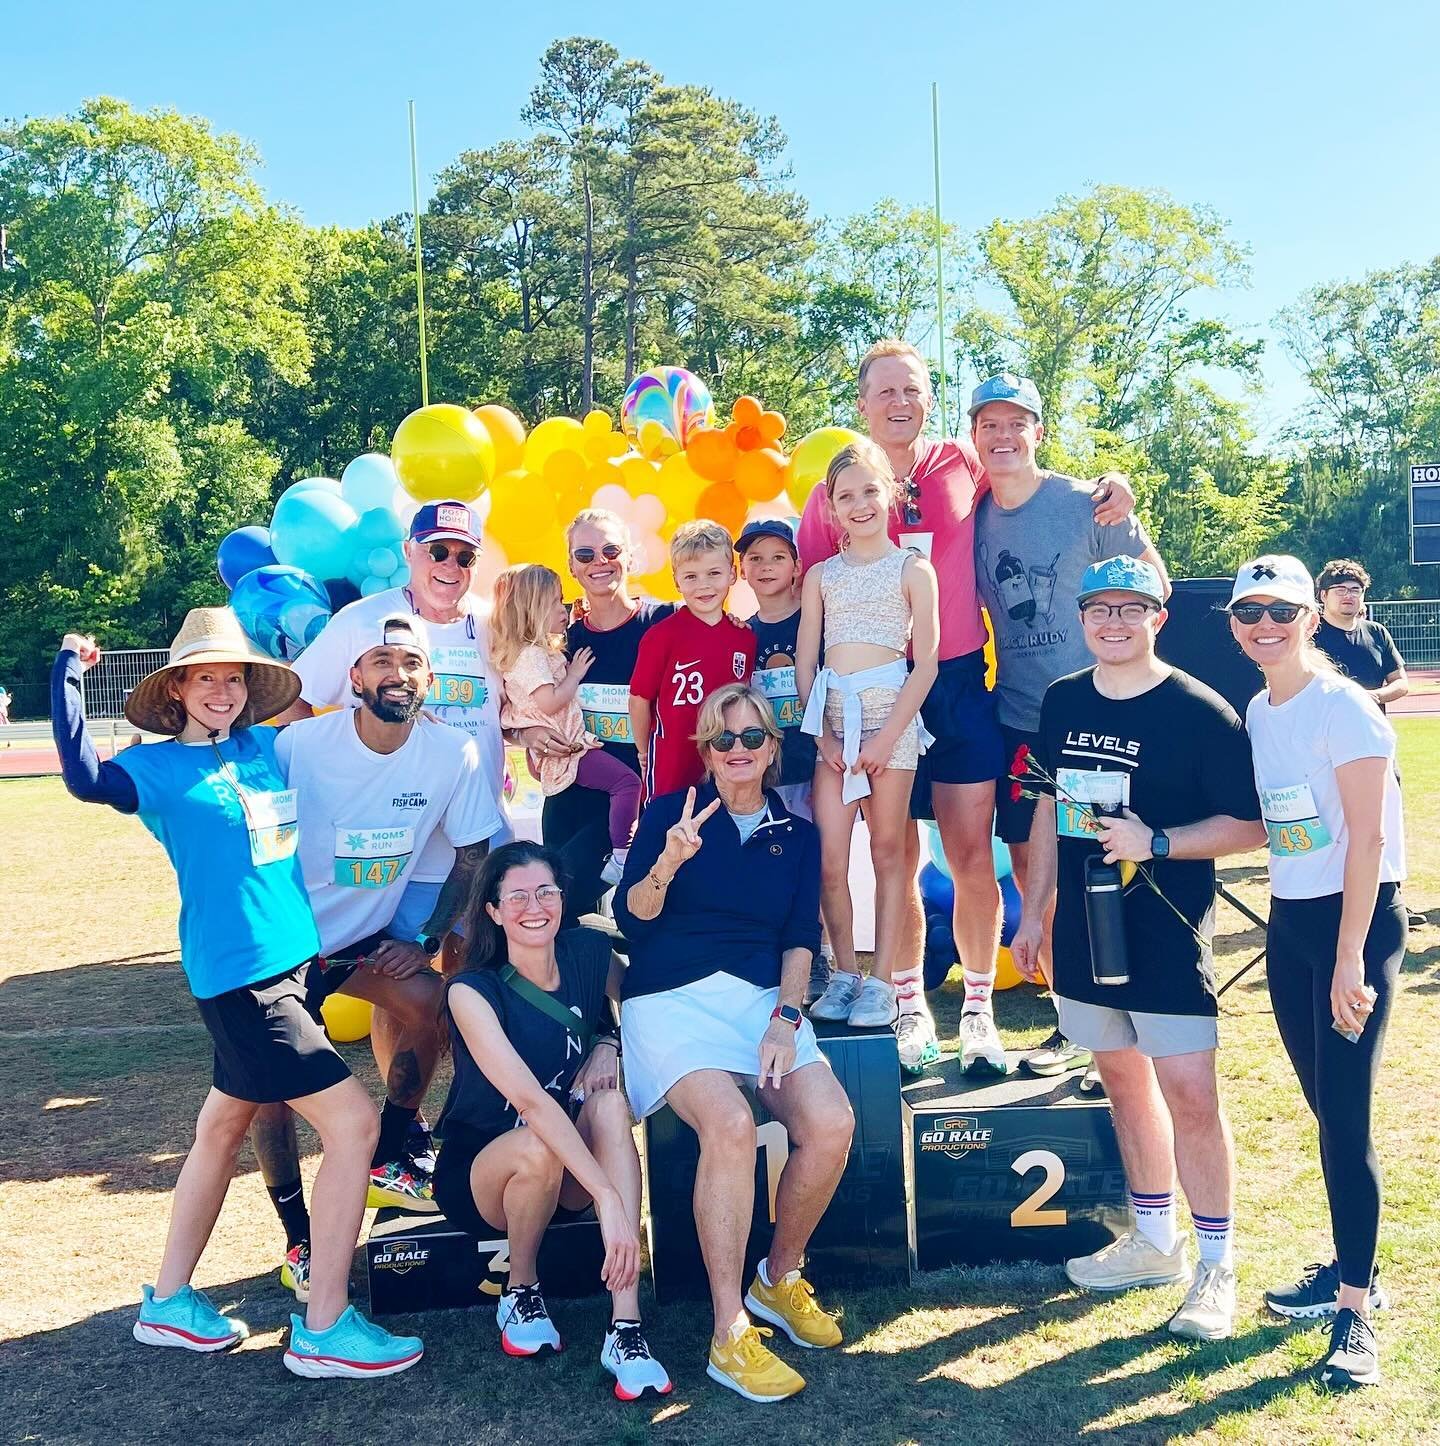 Happy Mother&rsquo;s Day to all you amazing mamas out there. Yesterday we put together a fabulous team (including my own mama @barbsezna 💞) and ran 5K in the @ppdsupportchs Mom&rsquo;s Run @momsrun_chs - to raise funds for an organization that means